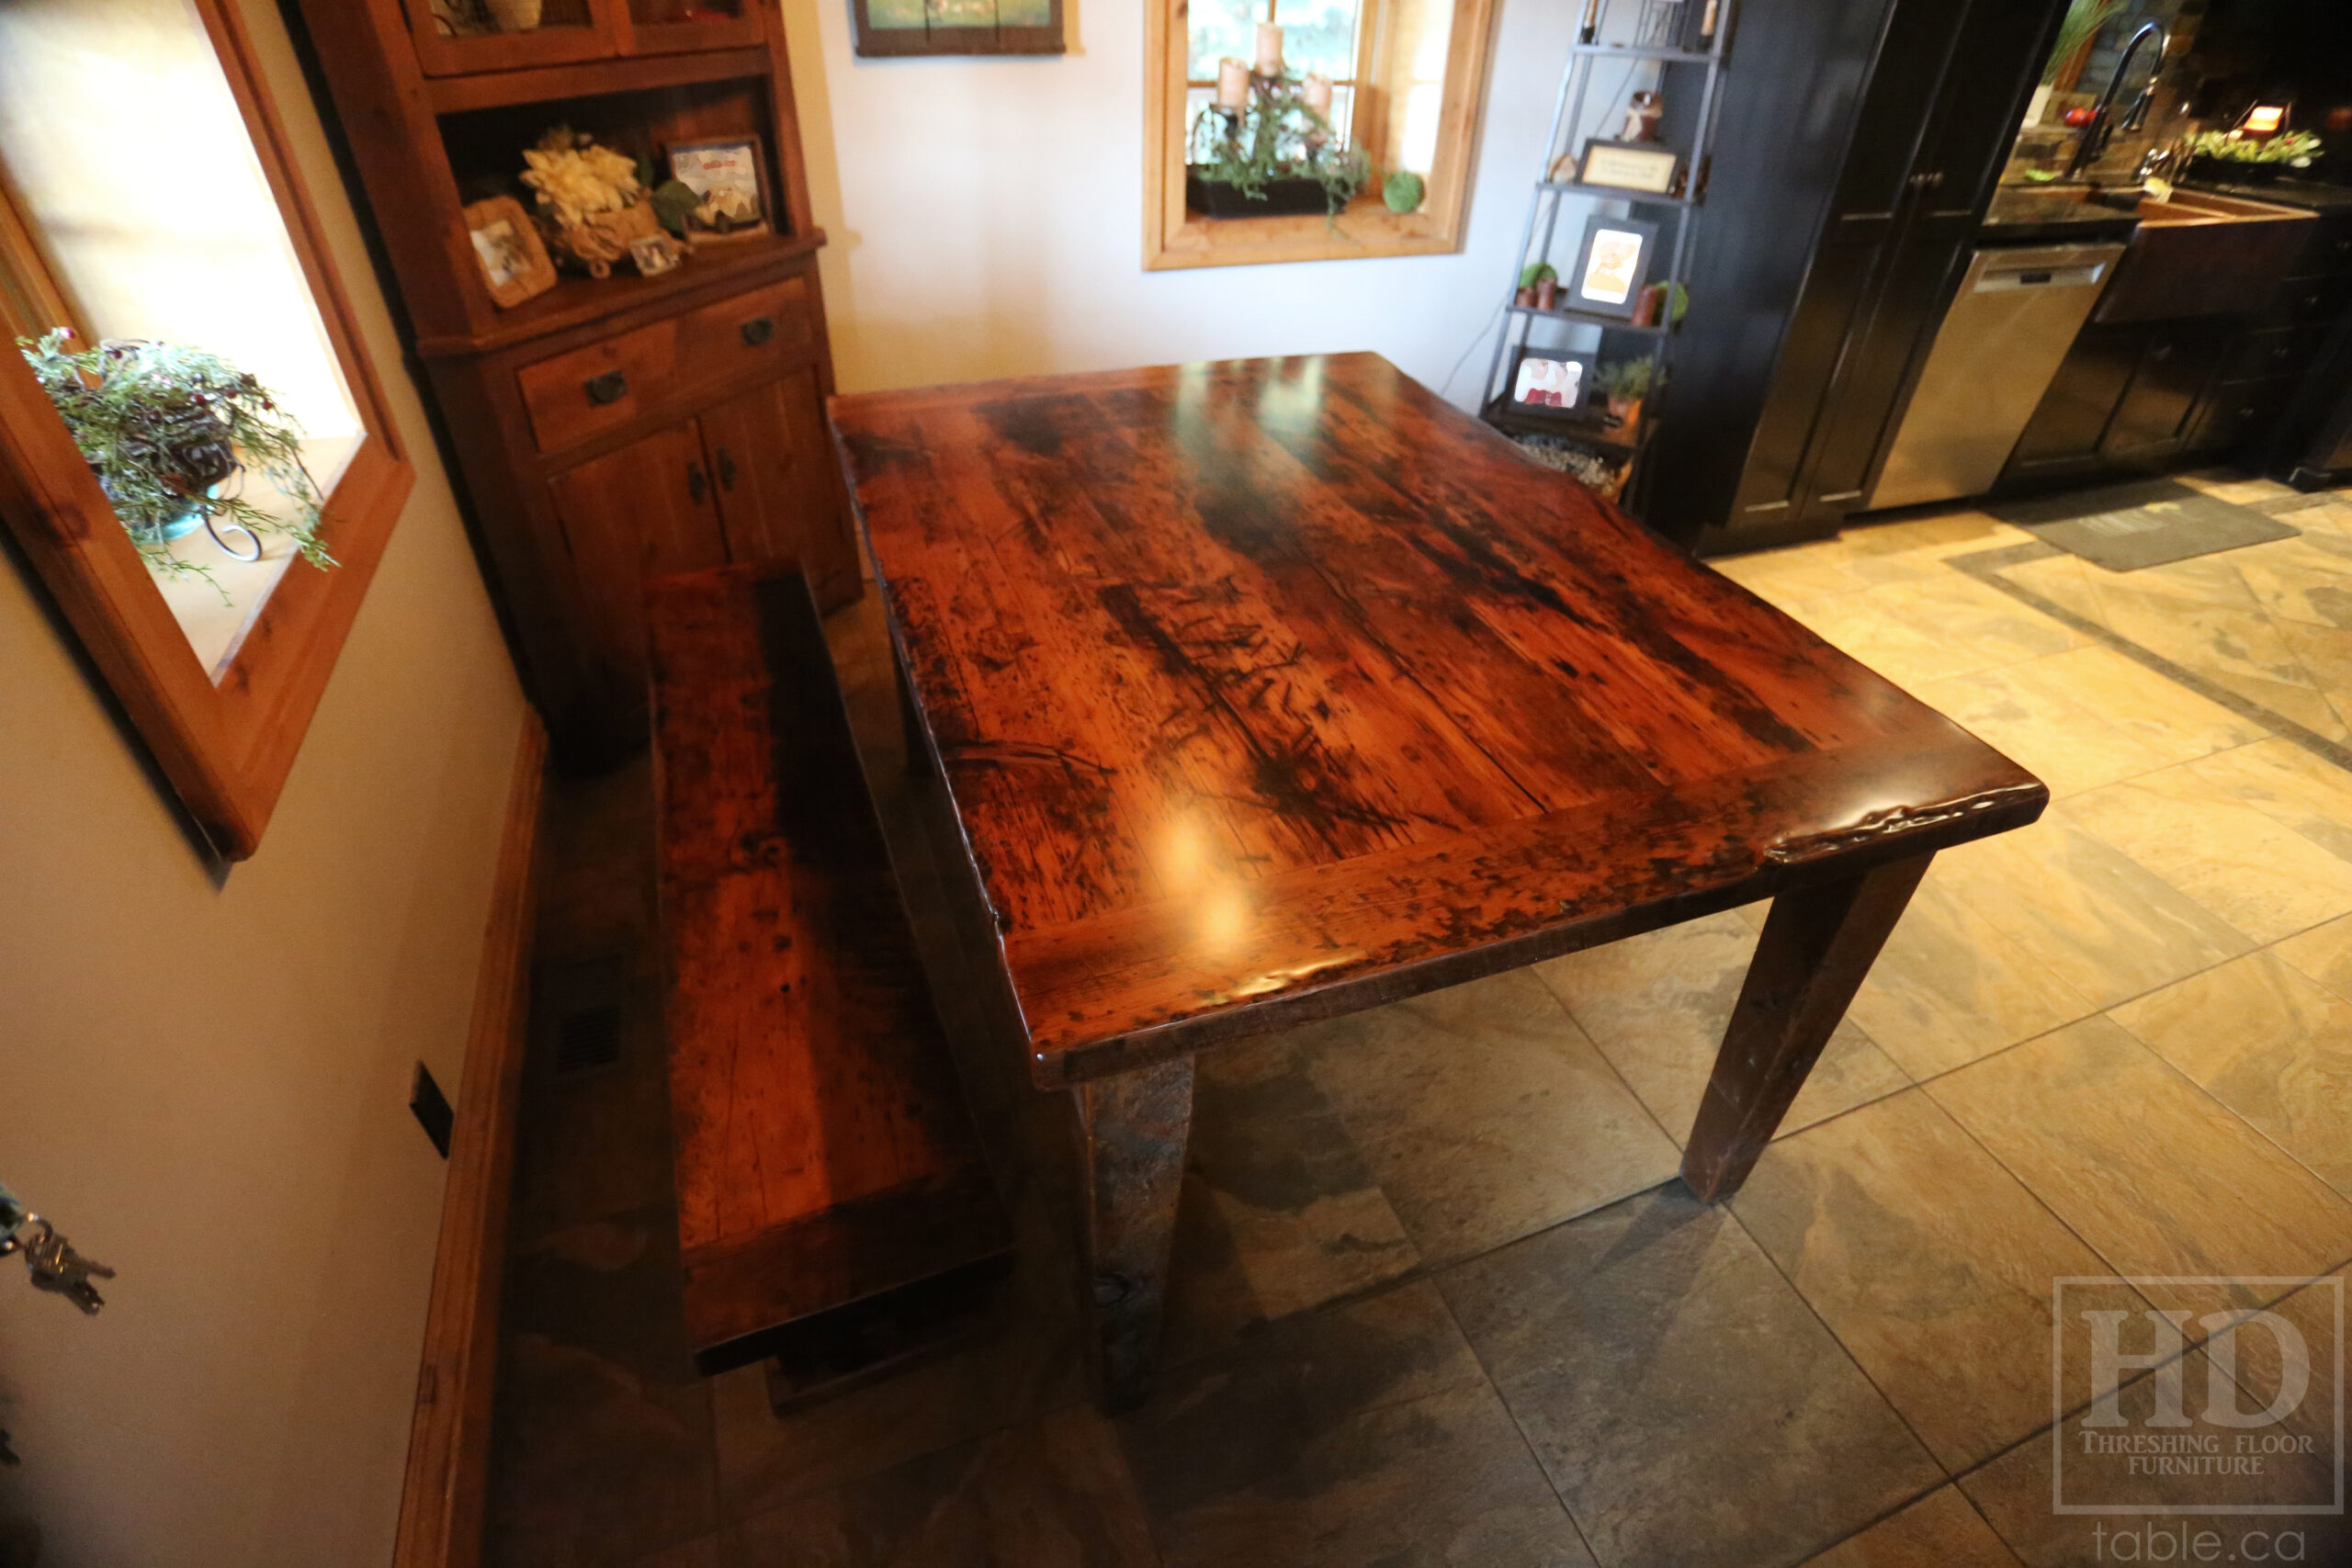 5' Reclaimed Ontario Barnwood Table we made for an Ariss, Ontario Home - 42" deep - Harvest Base: Tapered Windbrace Beam Legs - Old Growth Hemlock Threshing Floor Construction - Original edges & distressing maintained - Premium epoxy + satin polyurethane finish - 5' [matching] Bench - www.table.ca